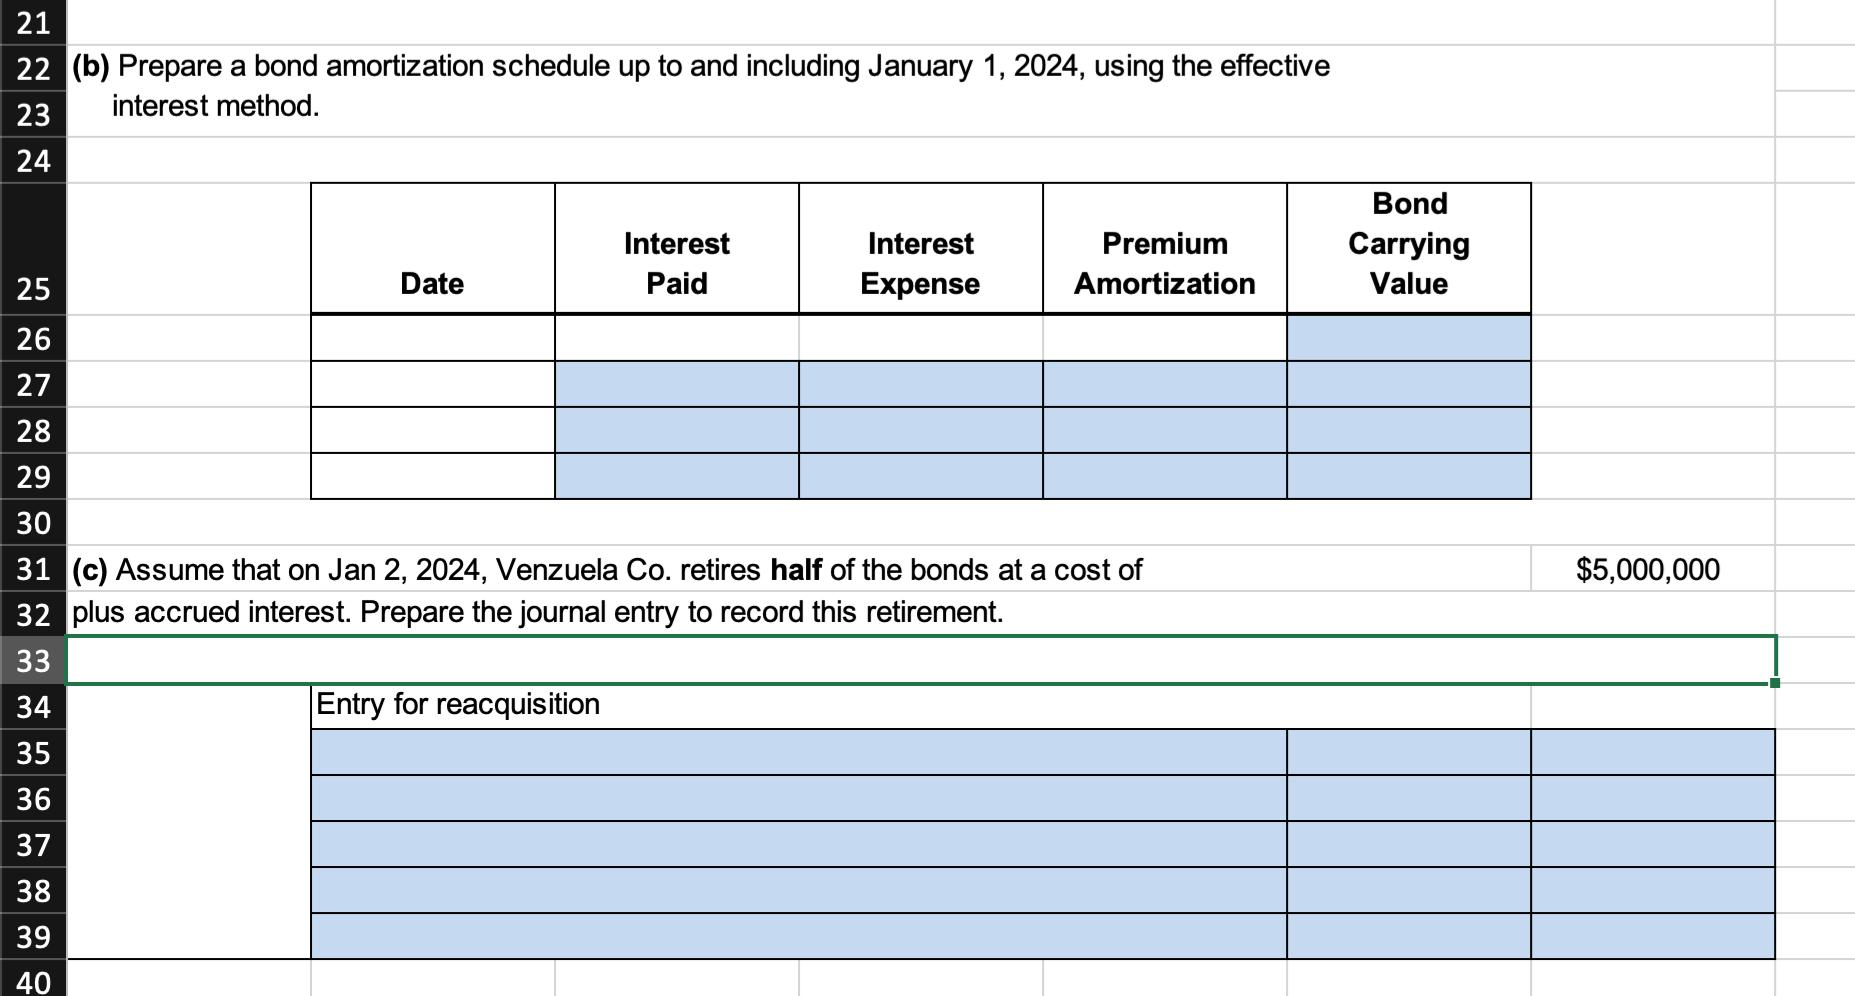 (b) Prepare a bond amortization schedule up to and including January 1,2024 , using the effective interest method.